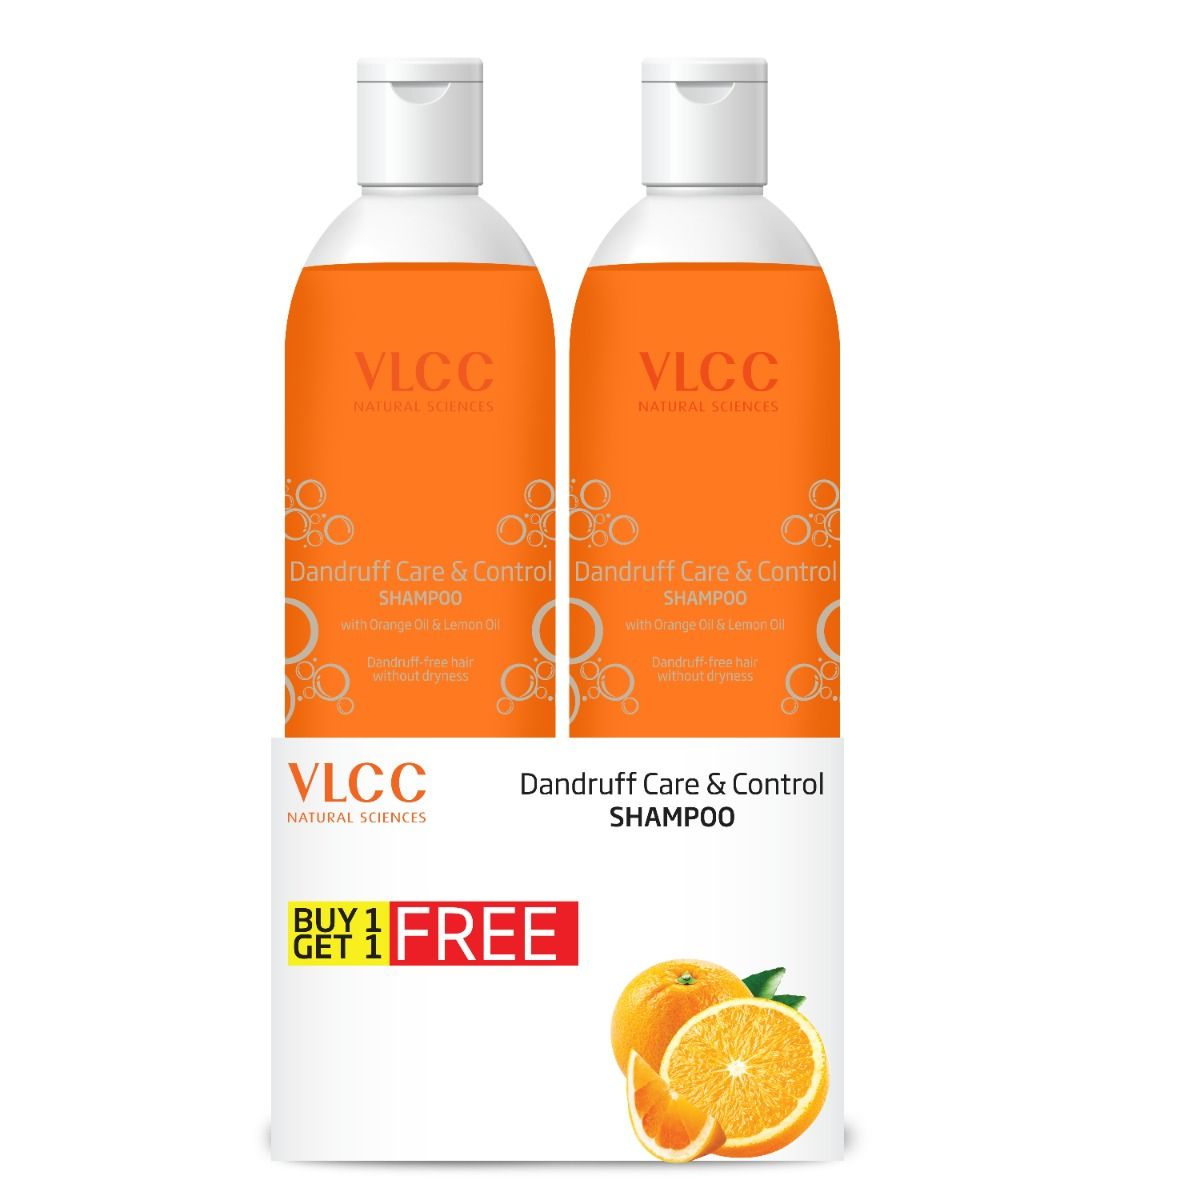 VLCC Dandruff Care & Control Shampoo, 350 ml (Buy 1 Get 1 Free) Price,  Uses, Side Effects, Composition - Apollo Pharmacy